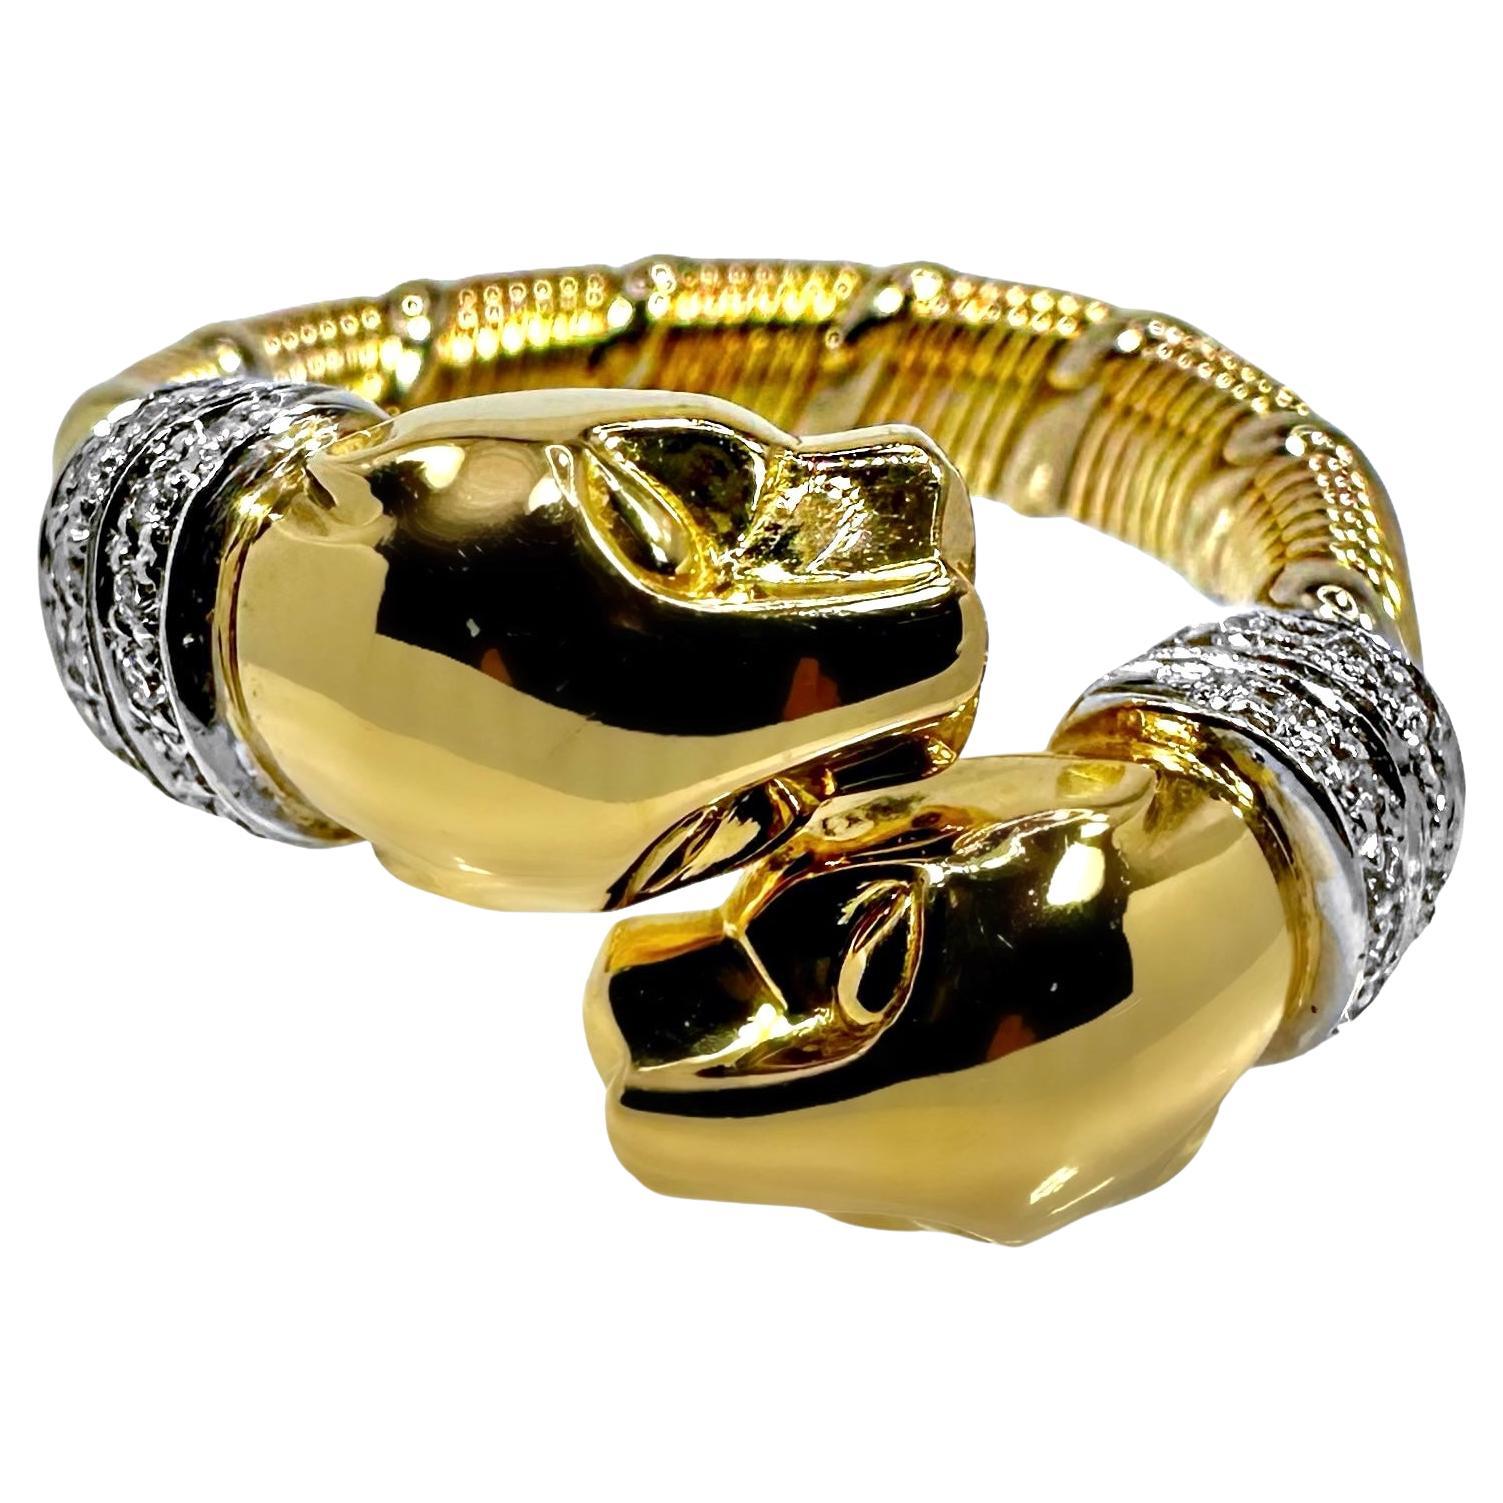 Iconic Cartier Panthere Bypass Ring in Gold and Diamonds